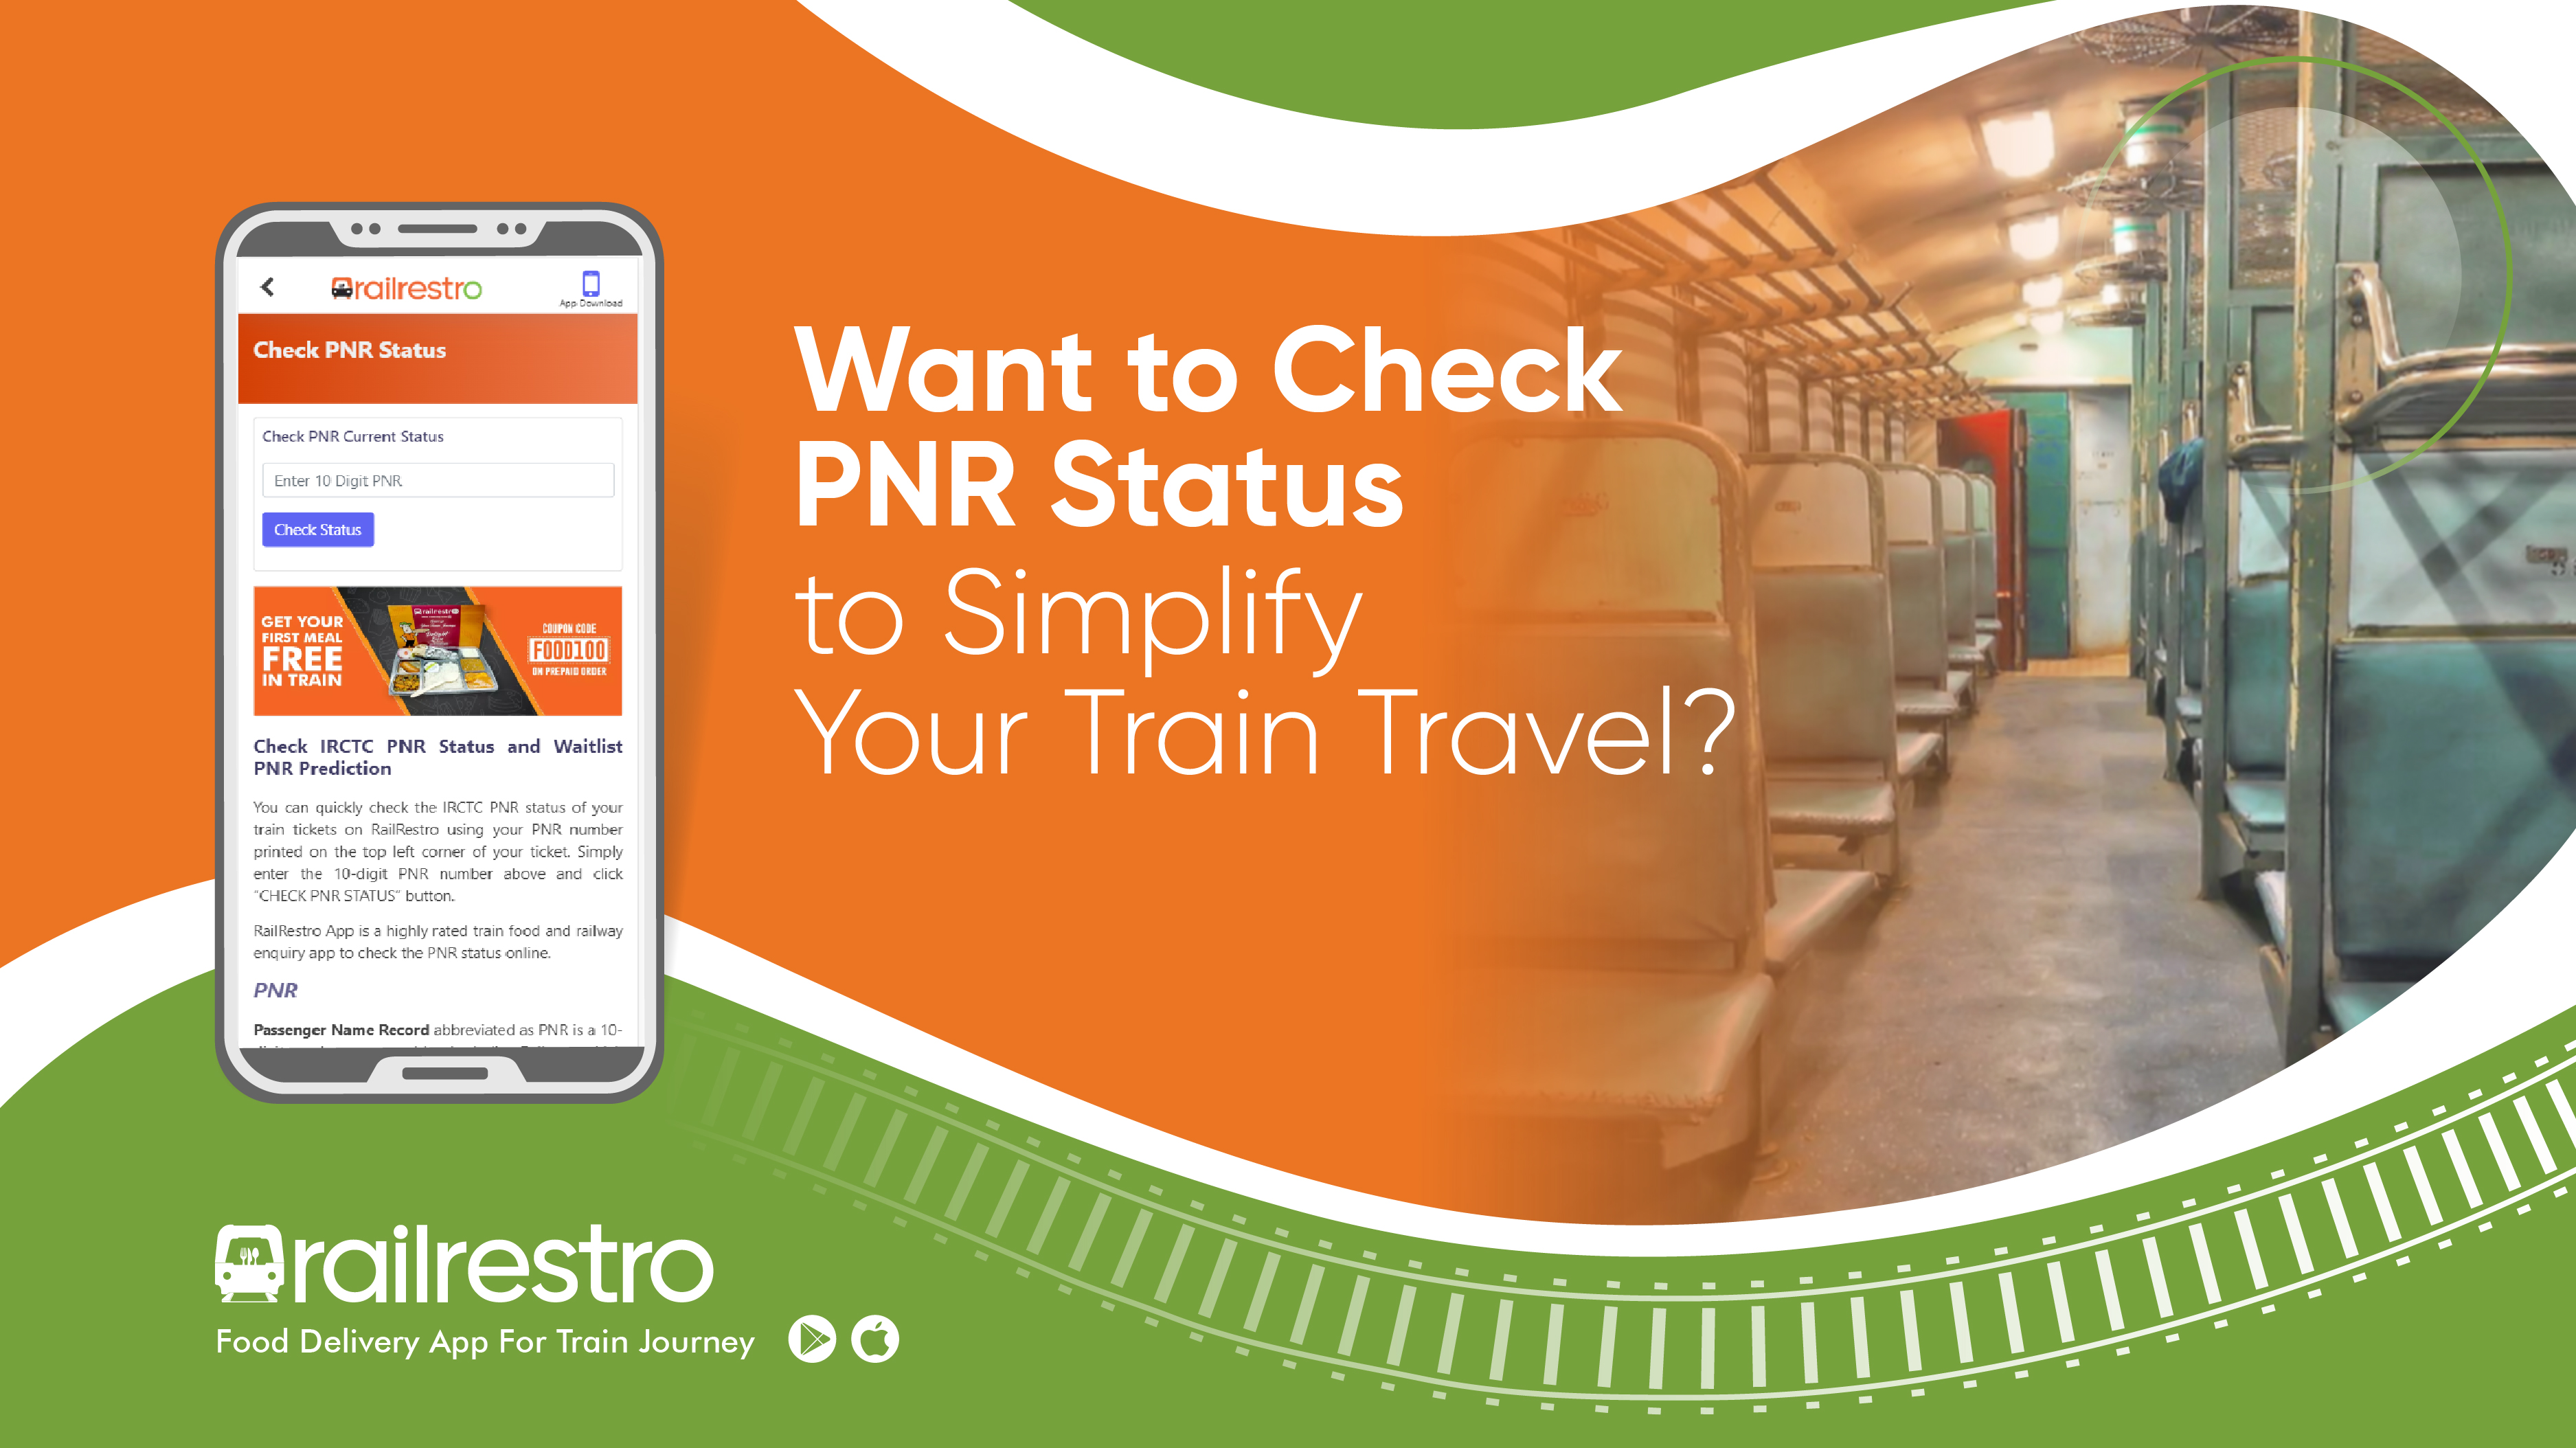 Want to Check PNR Status to Simplify Your Train Travel